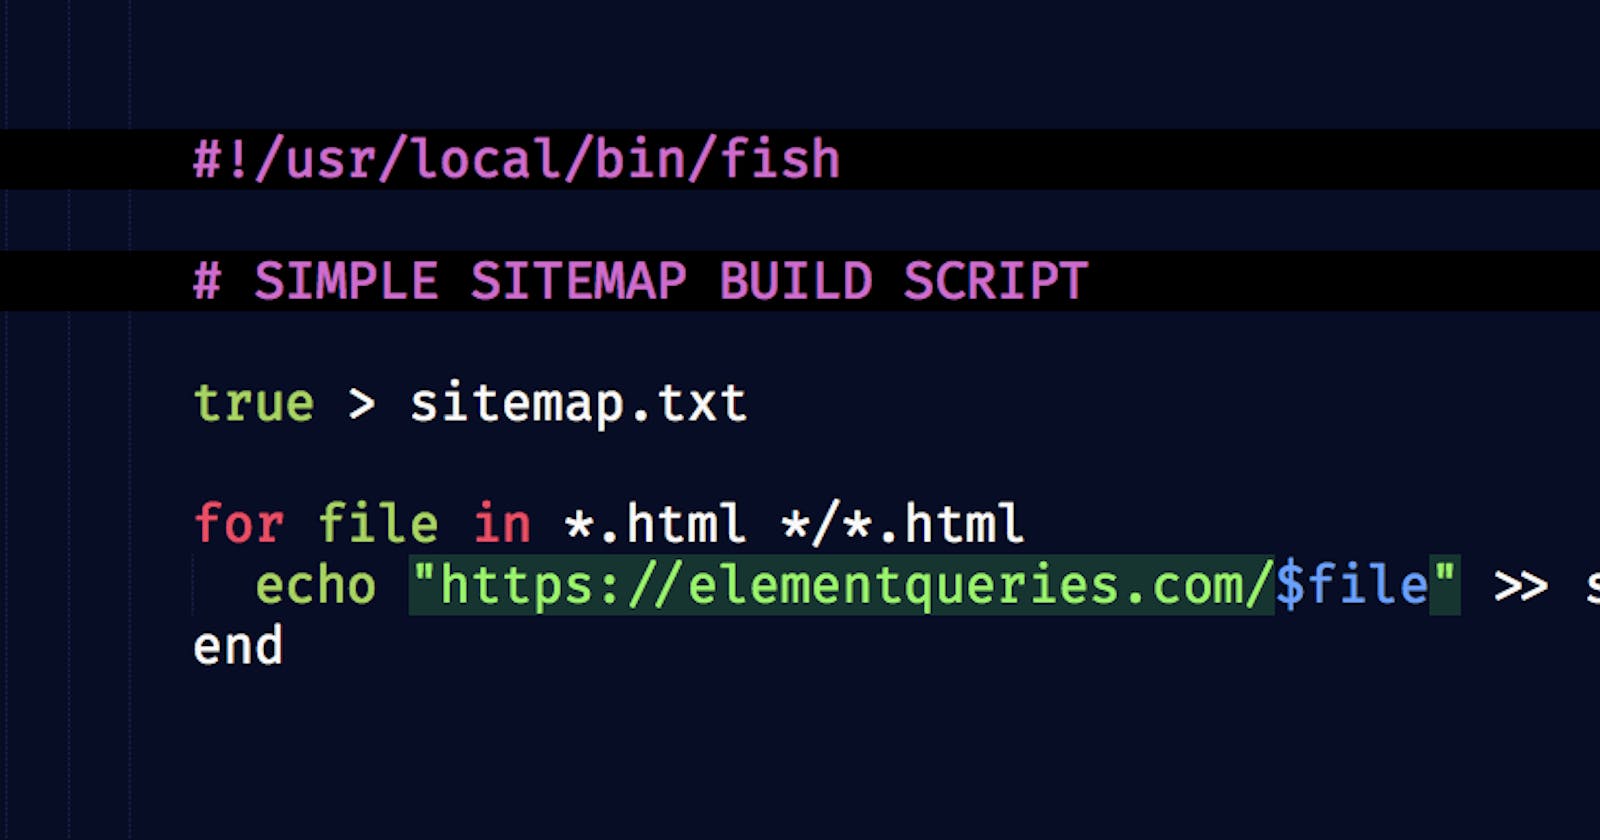 TIL you can use TXT files for sitemaps